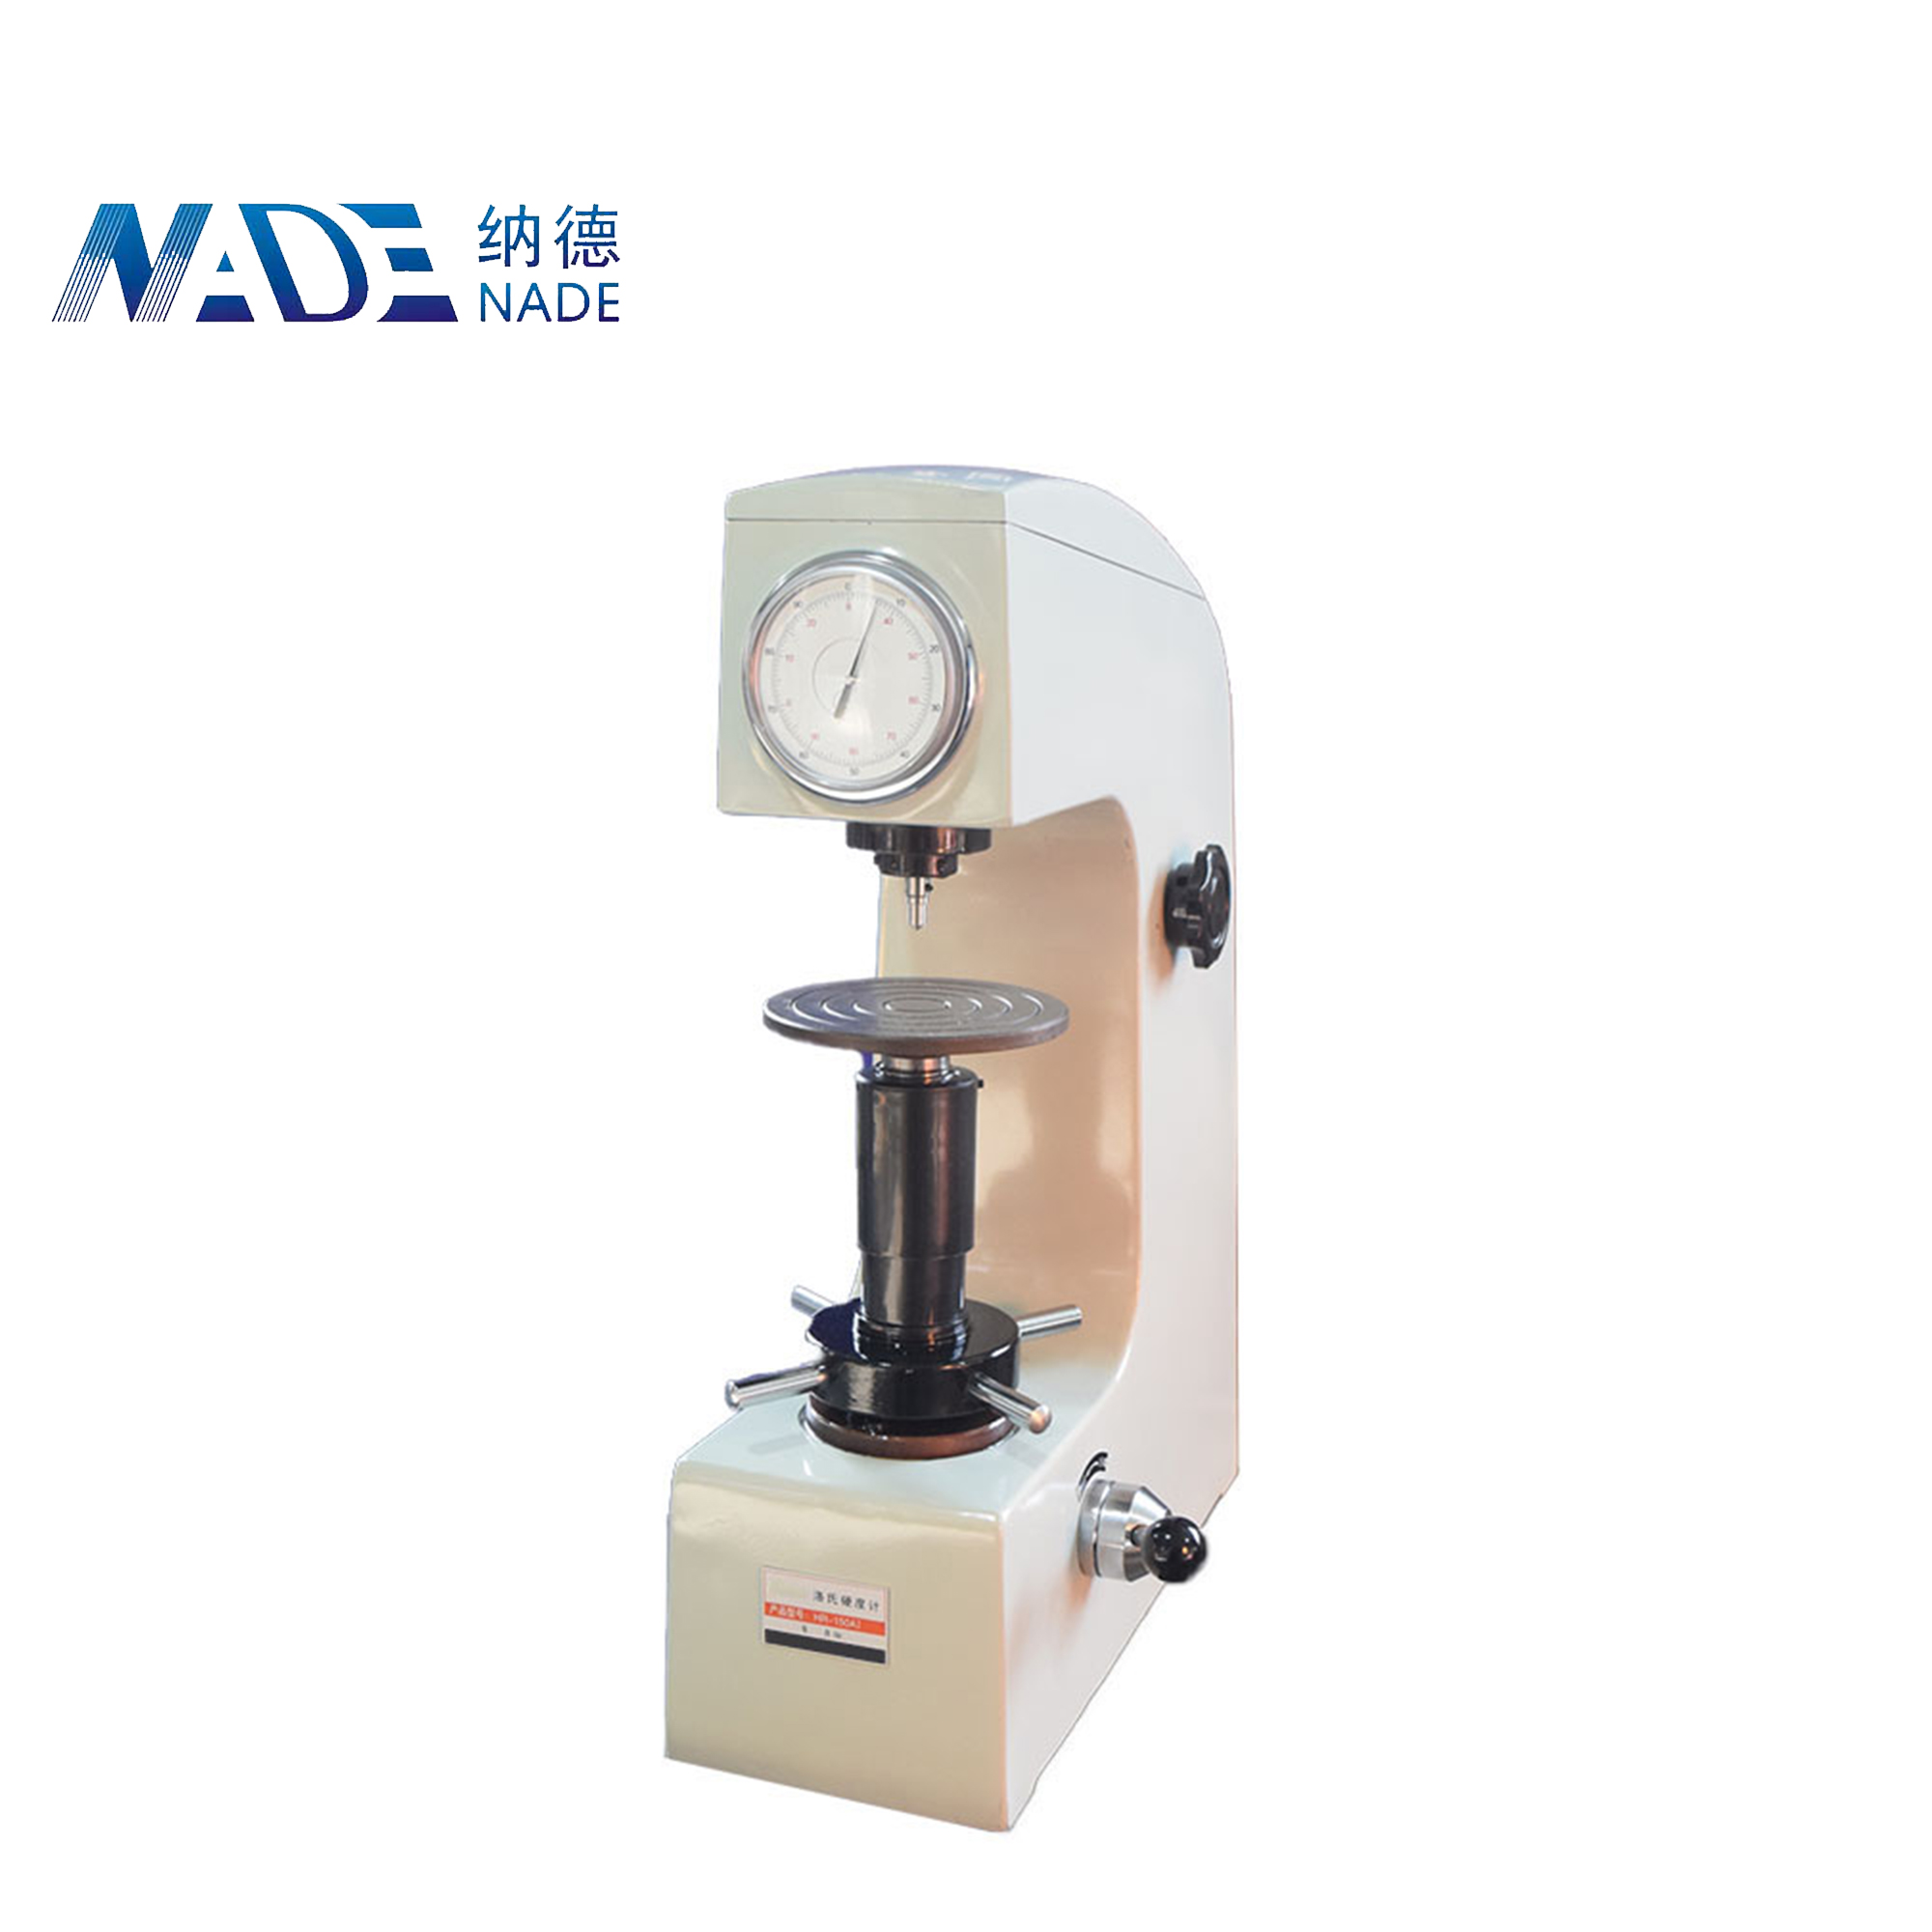 NADE HR-150AI Manual rockwell hardness tester Price for ferrous, non-ferrous metals and non-metal materials